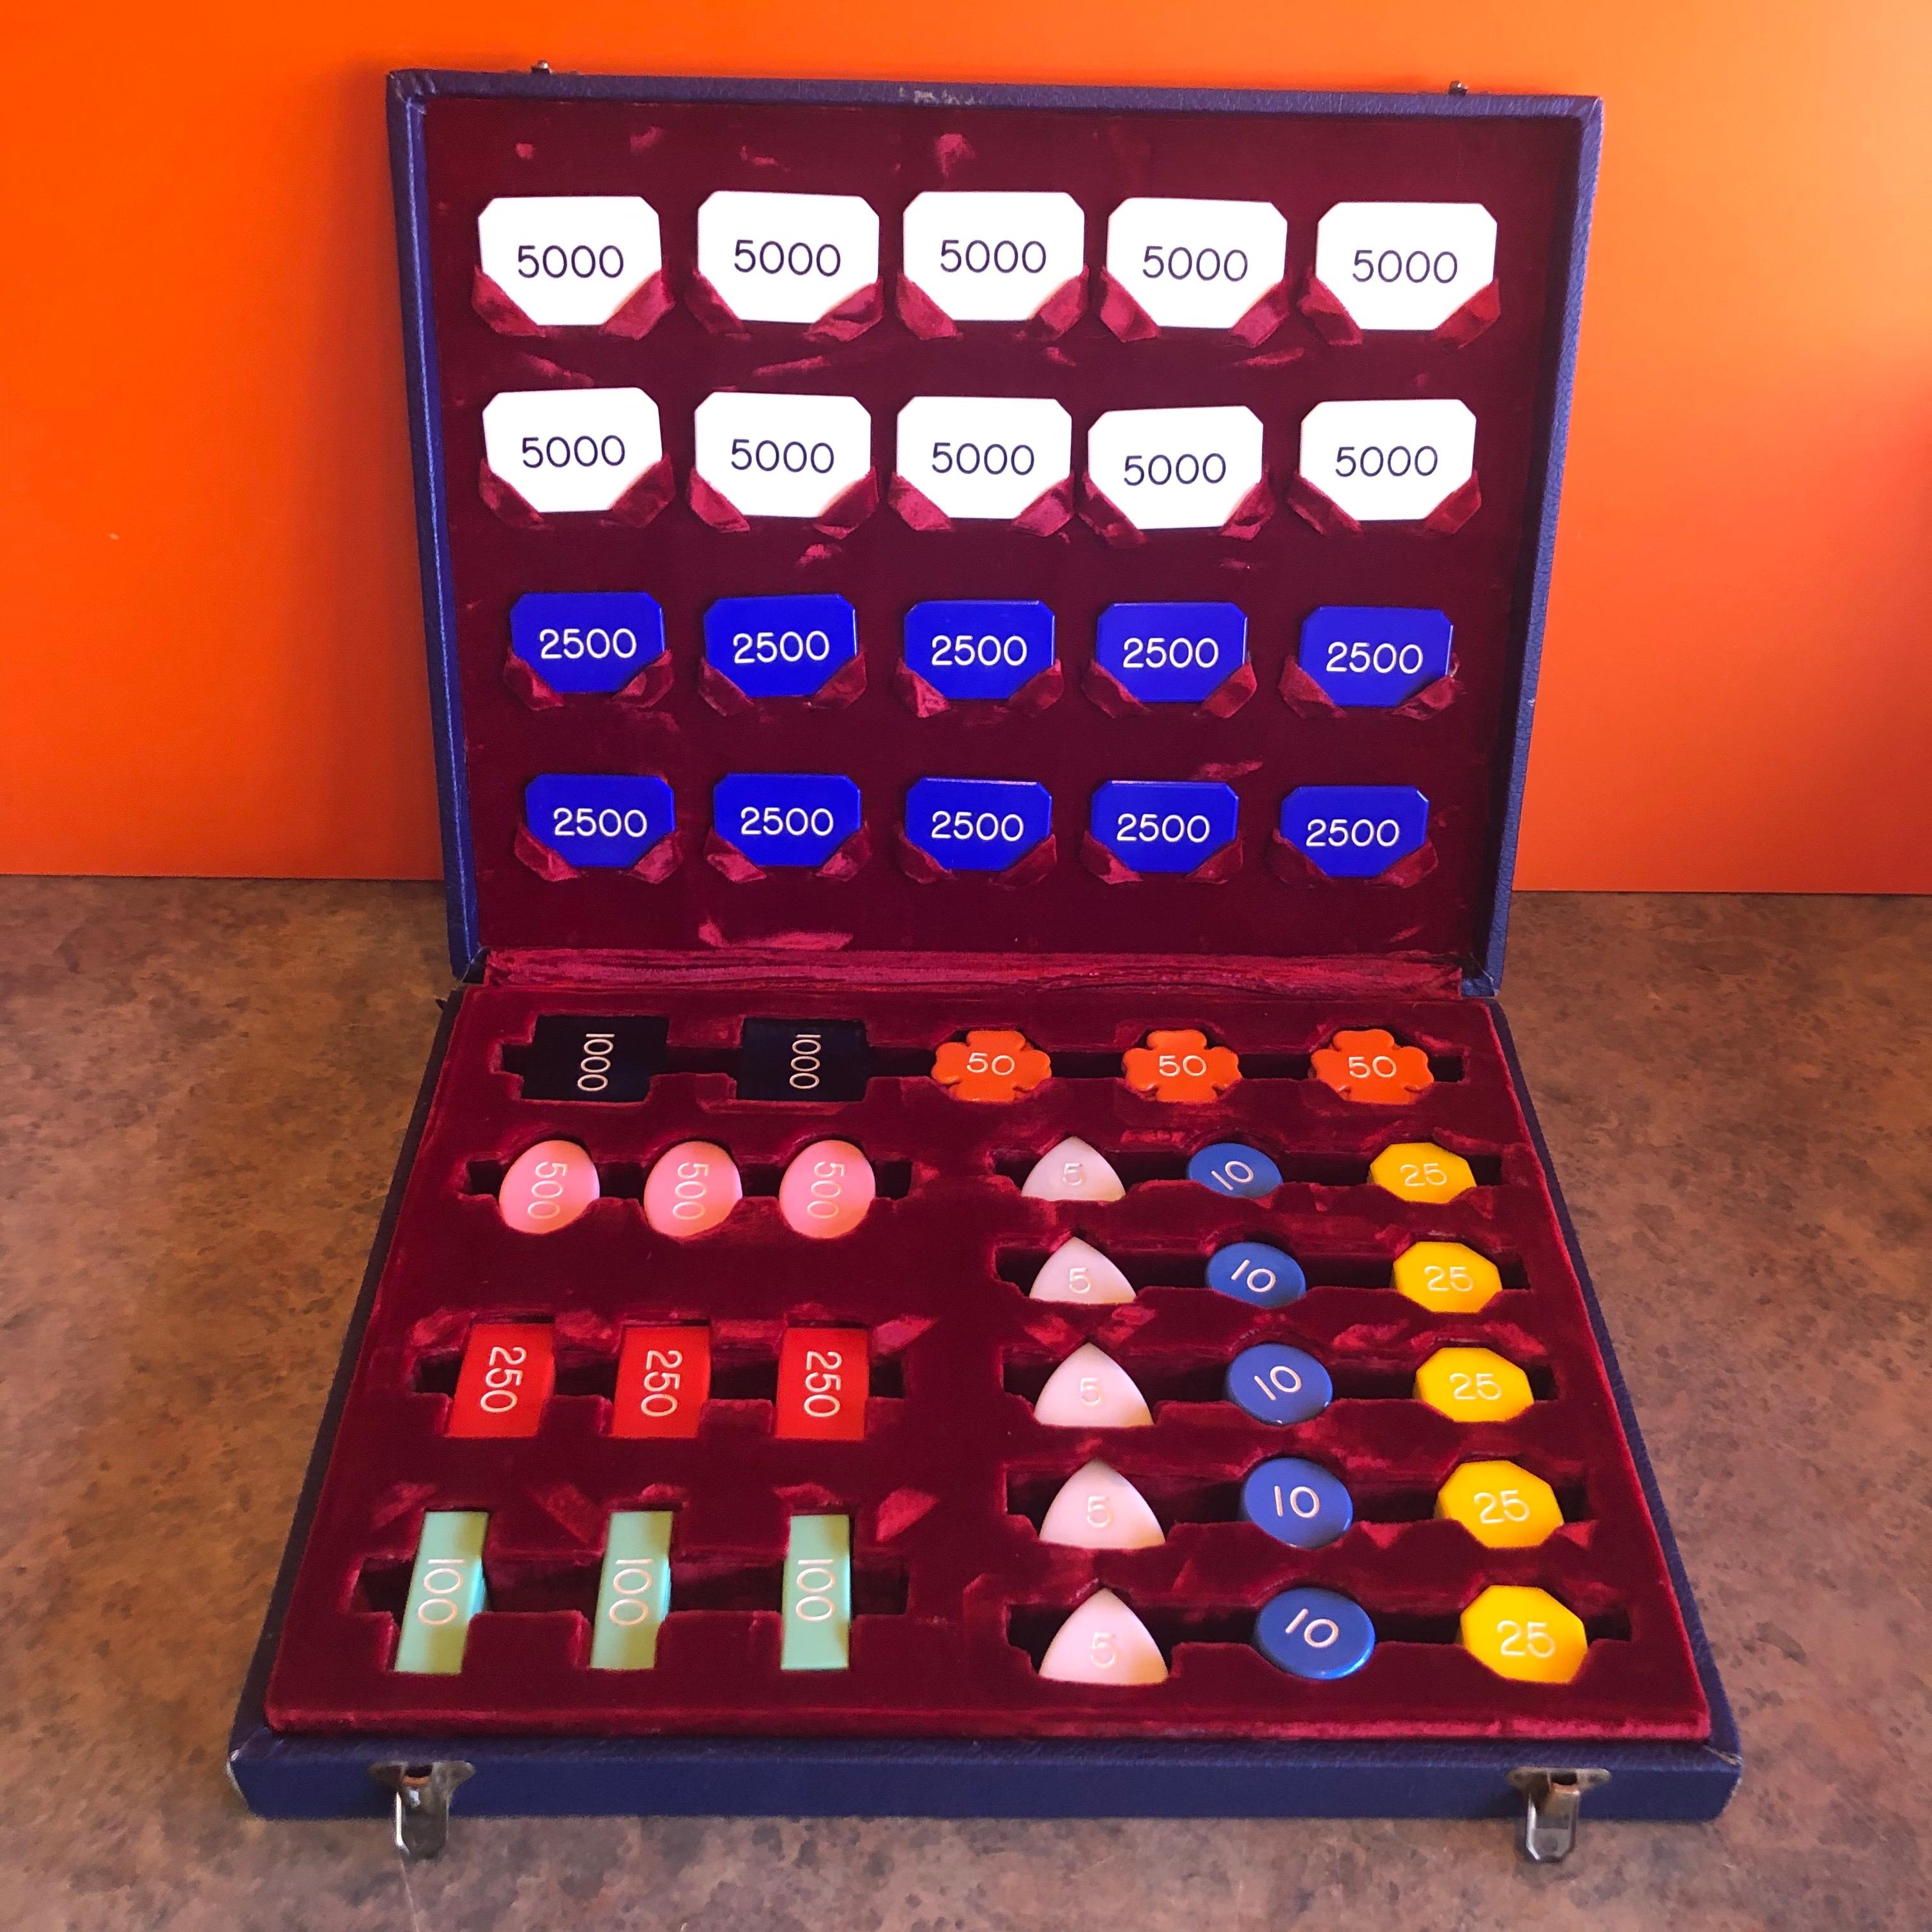 Vintage set of baccarat or poker chips and markers in a blue custom case with red crushed velvet storage departments by Cheney of England, circa 1950s. The set is in very good condition and contains 300 Bakelite 